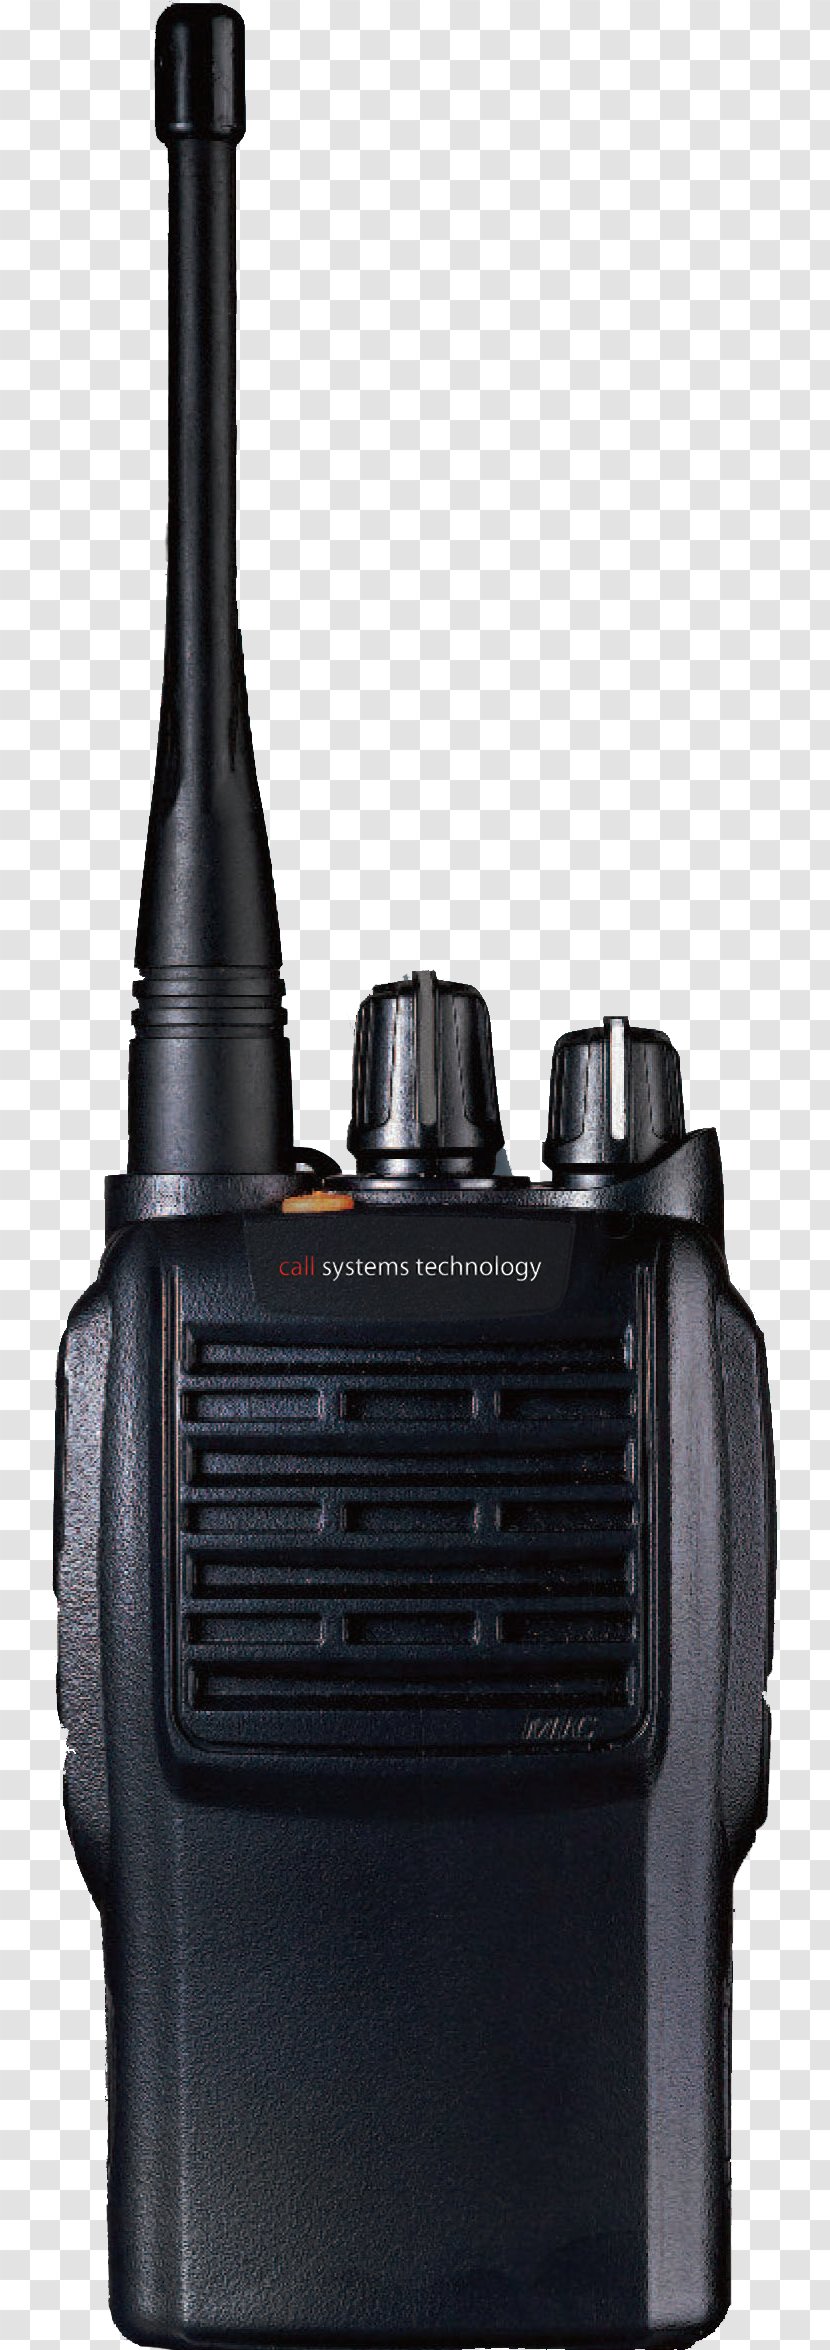 Walkie-talkie Motorola Solutions Request For Quotation - Two Way Radio Transparent PNG